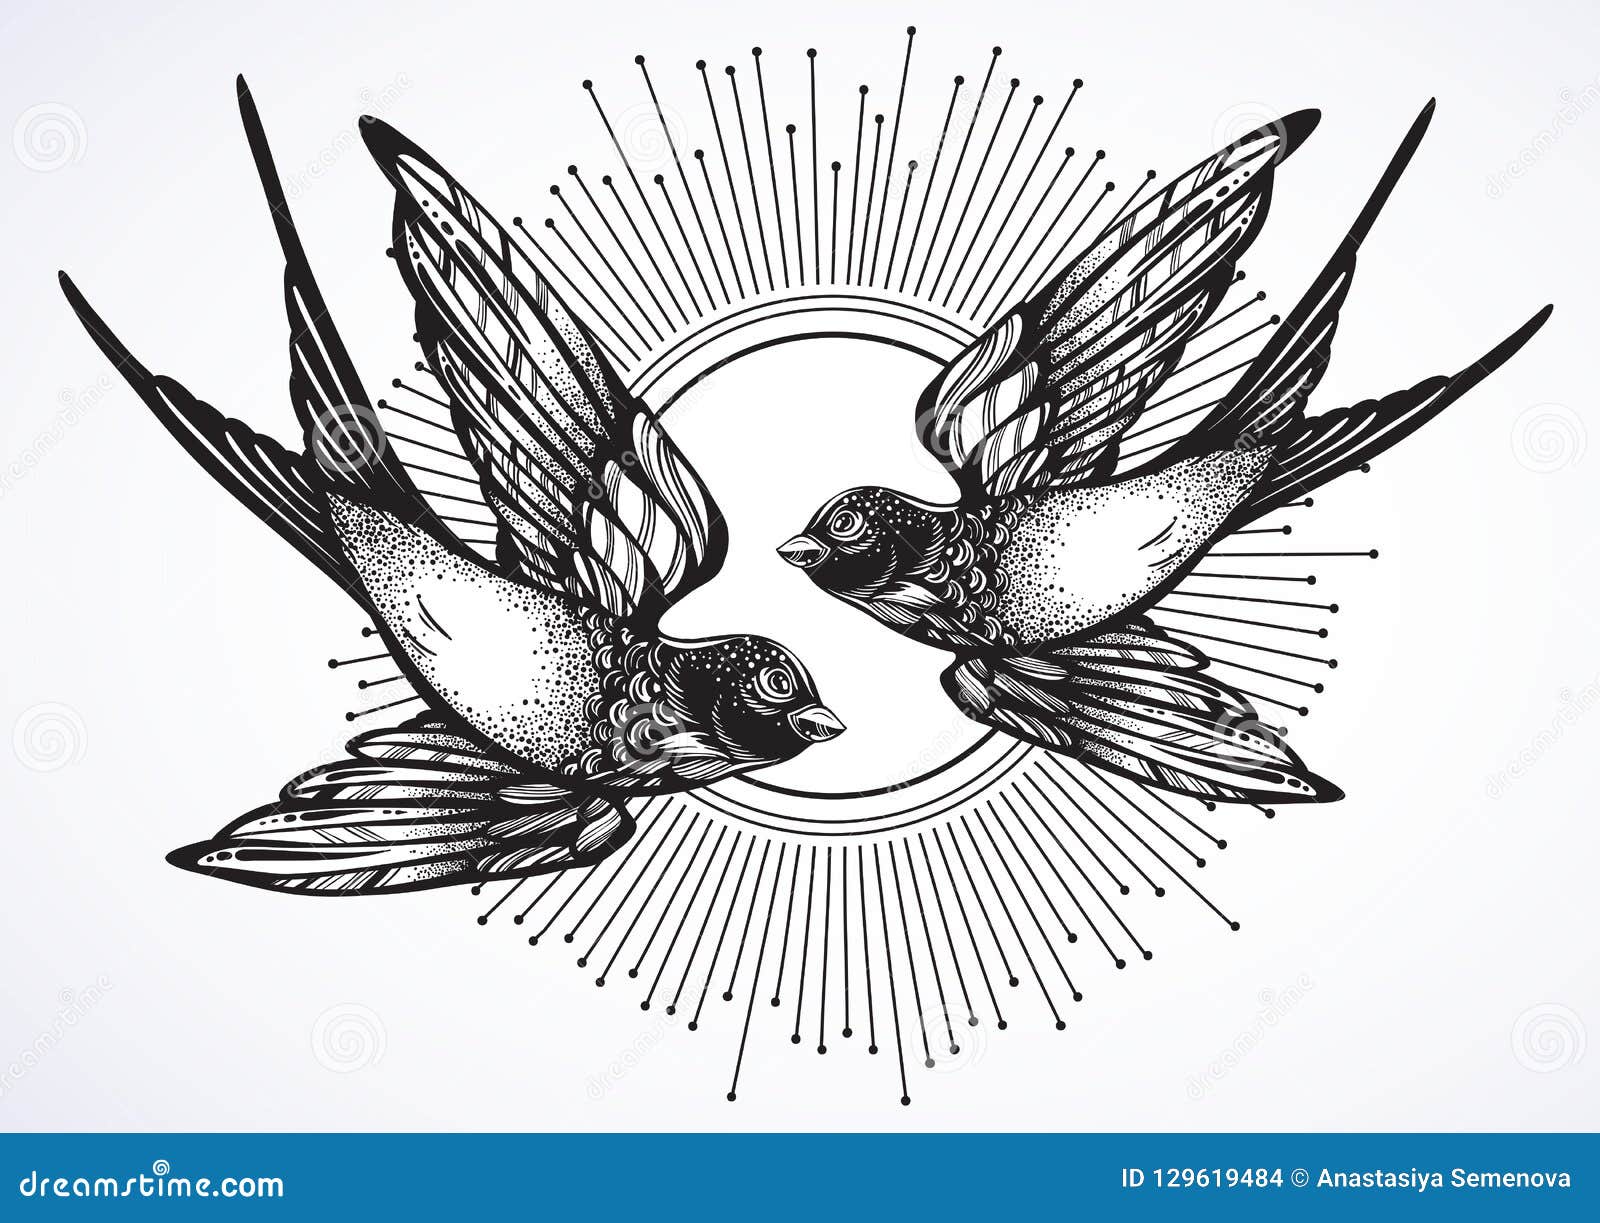 beautiful vintage retro style  of two flying swallow birds. hand drawn  artwork  on white.